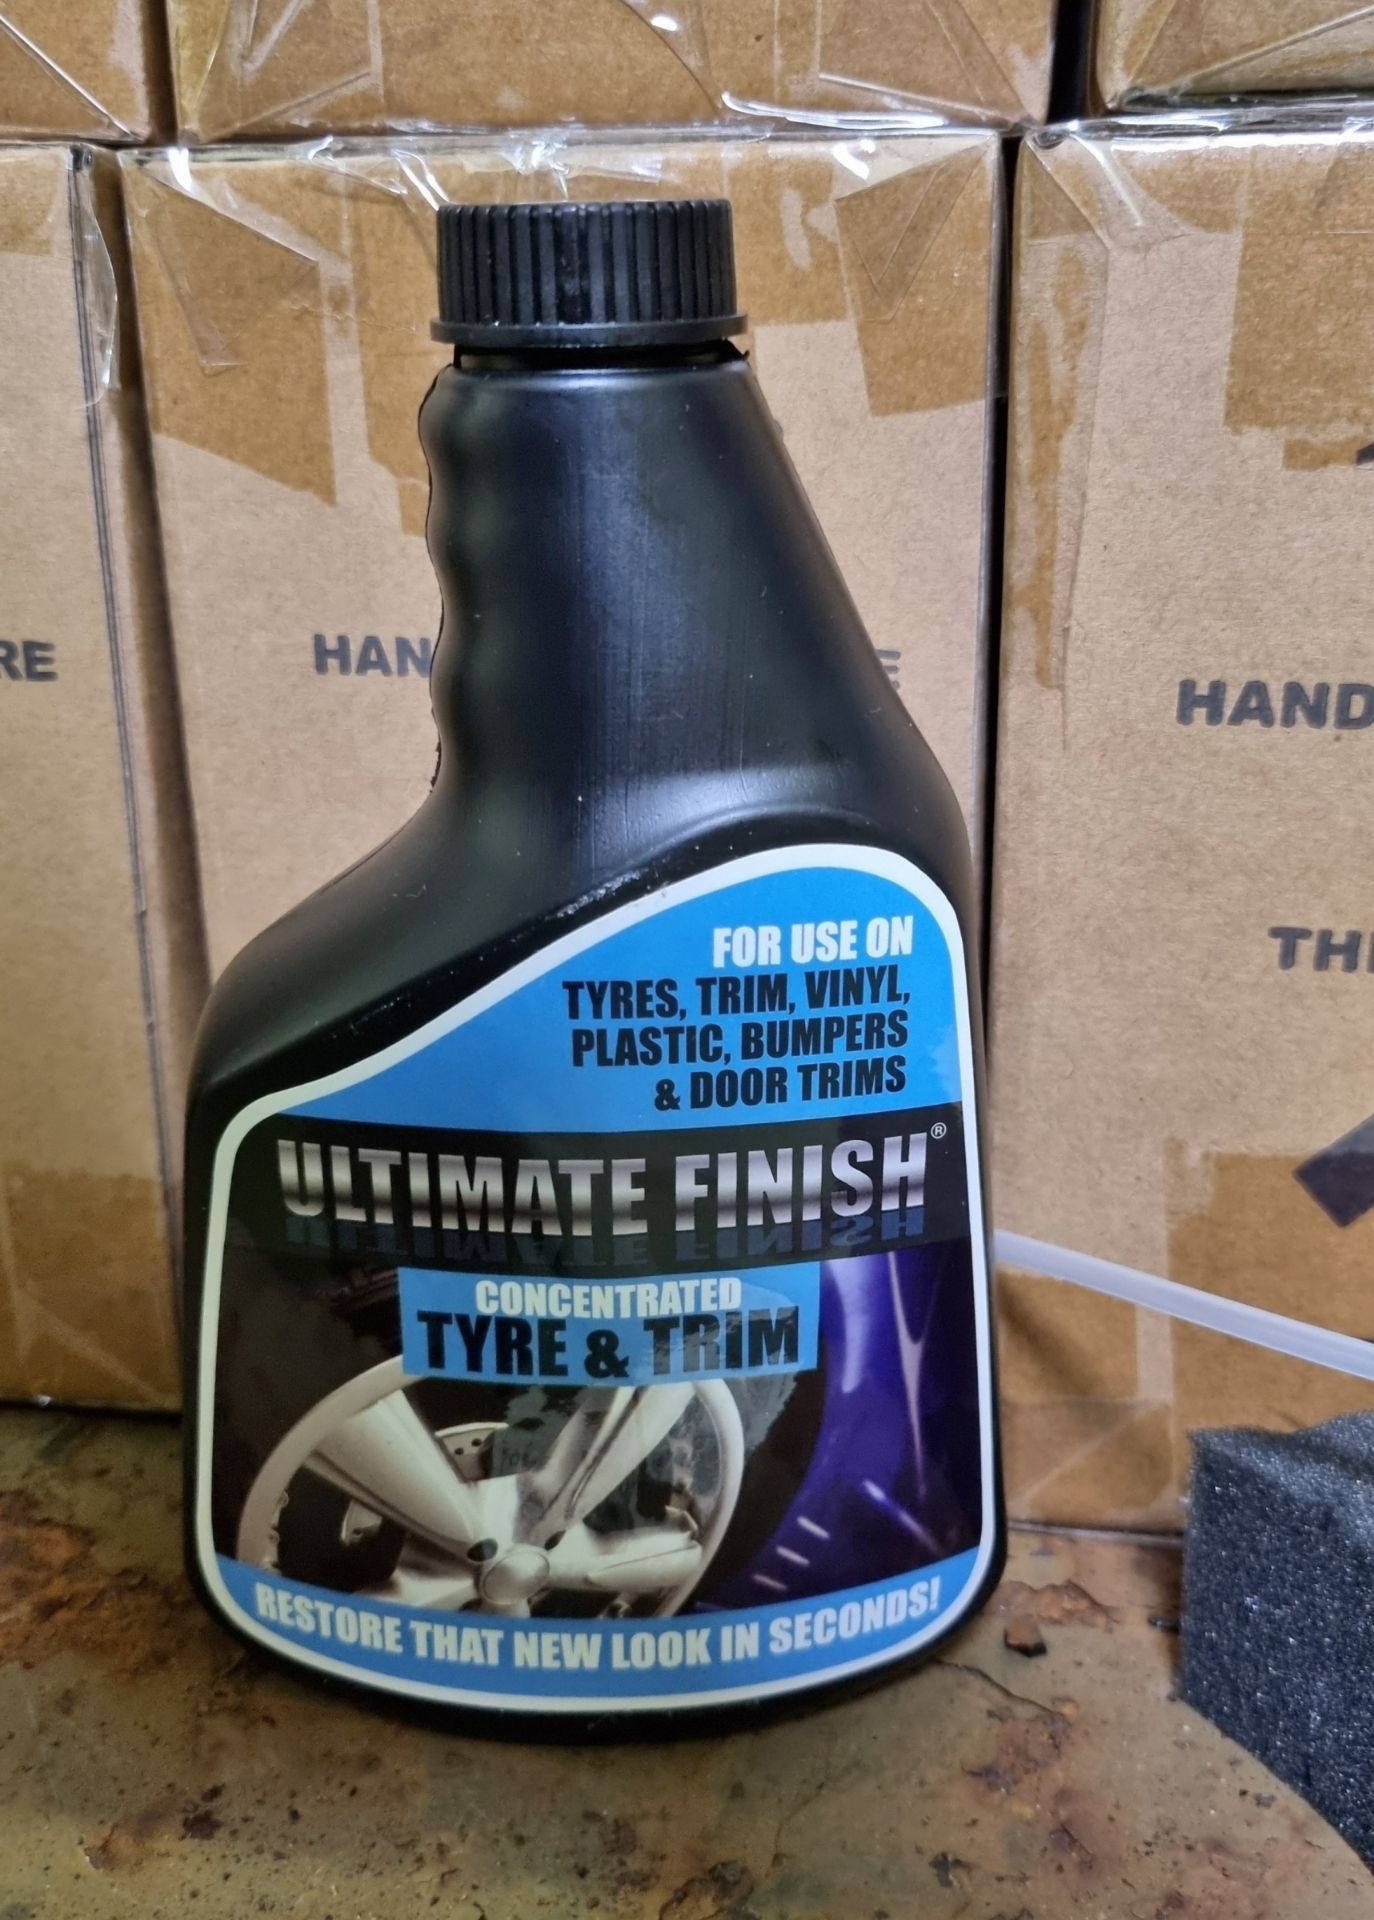 50x Ultimate Finish concentrate tyre & trim - double packs - 2x 500ml spray bottles & 2x applicators - Image 3 of 4